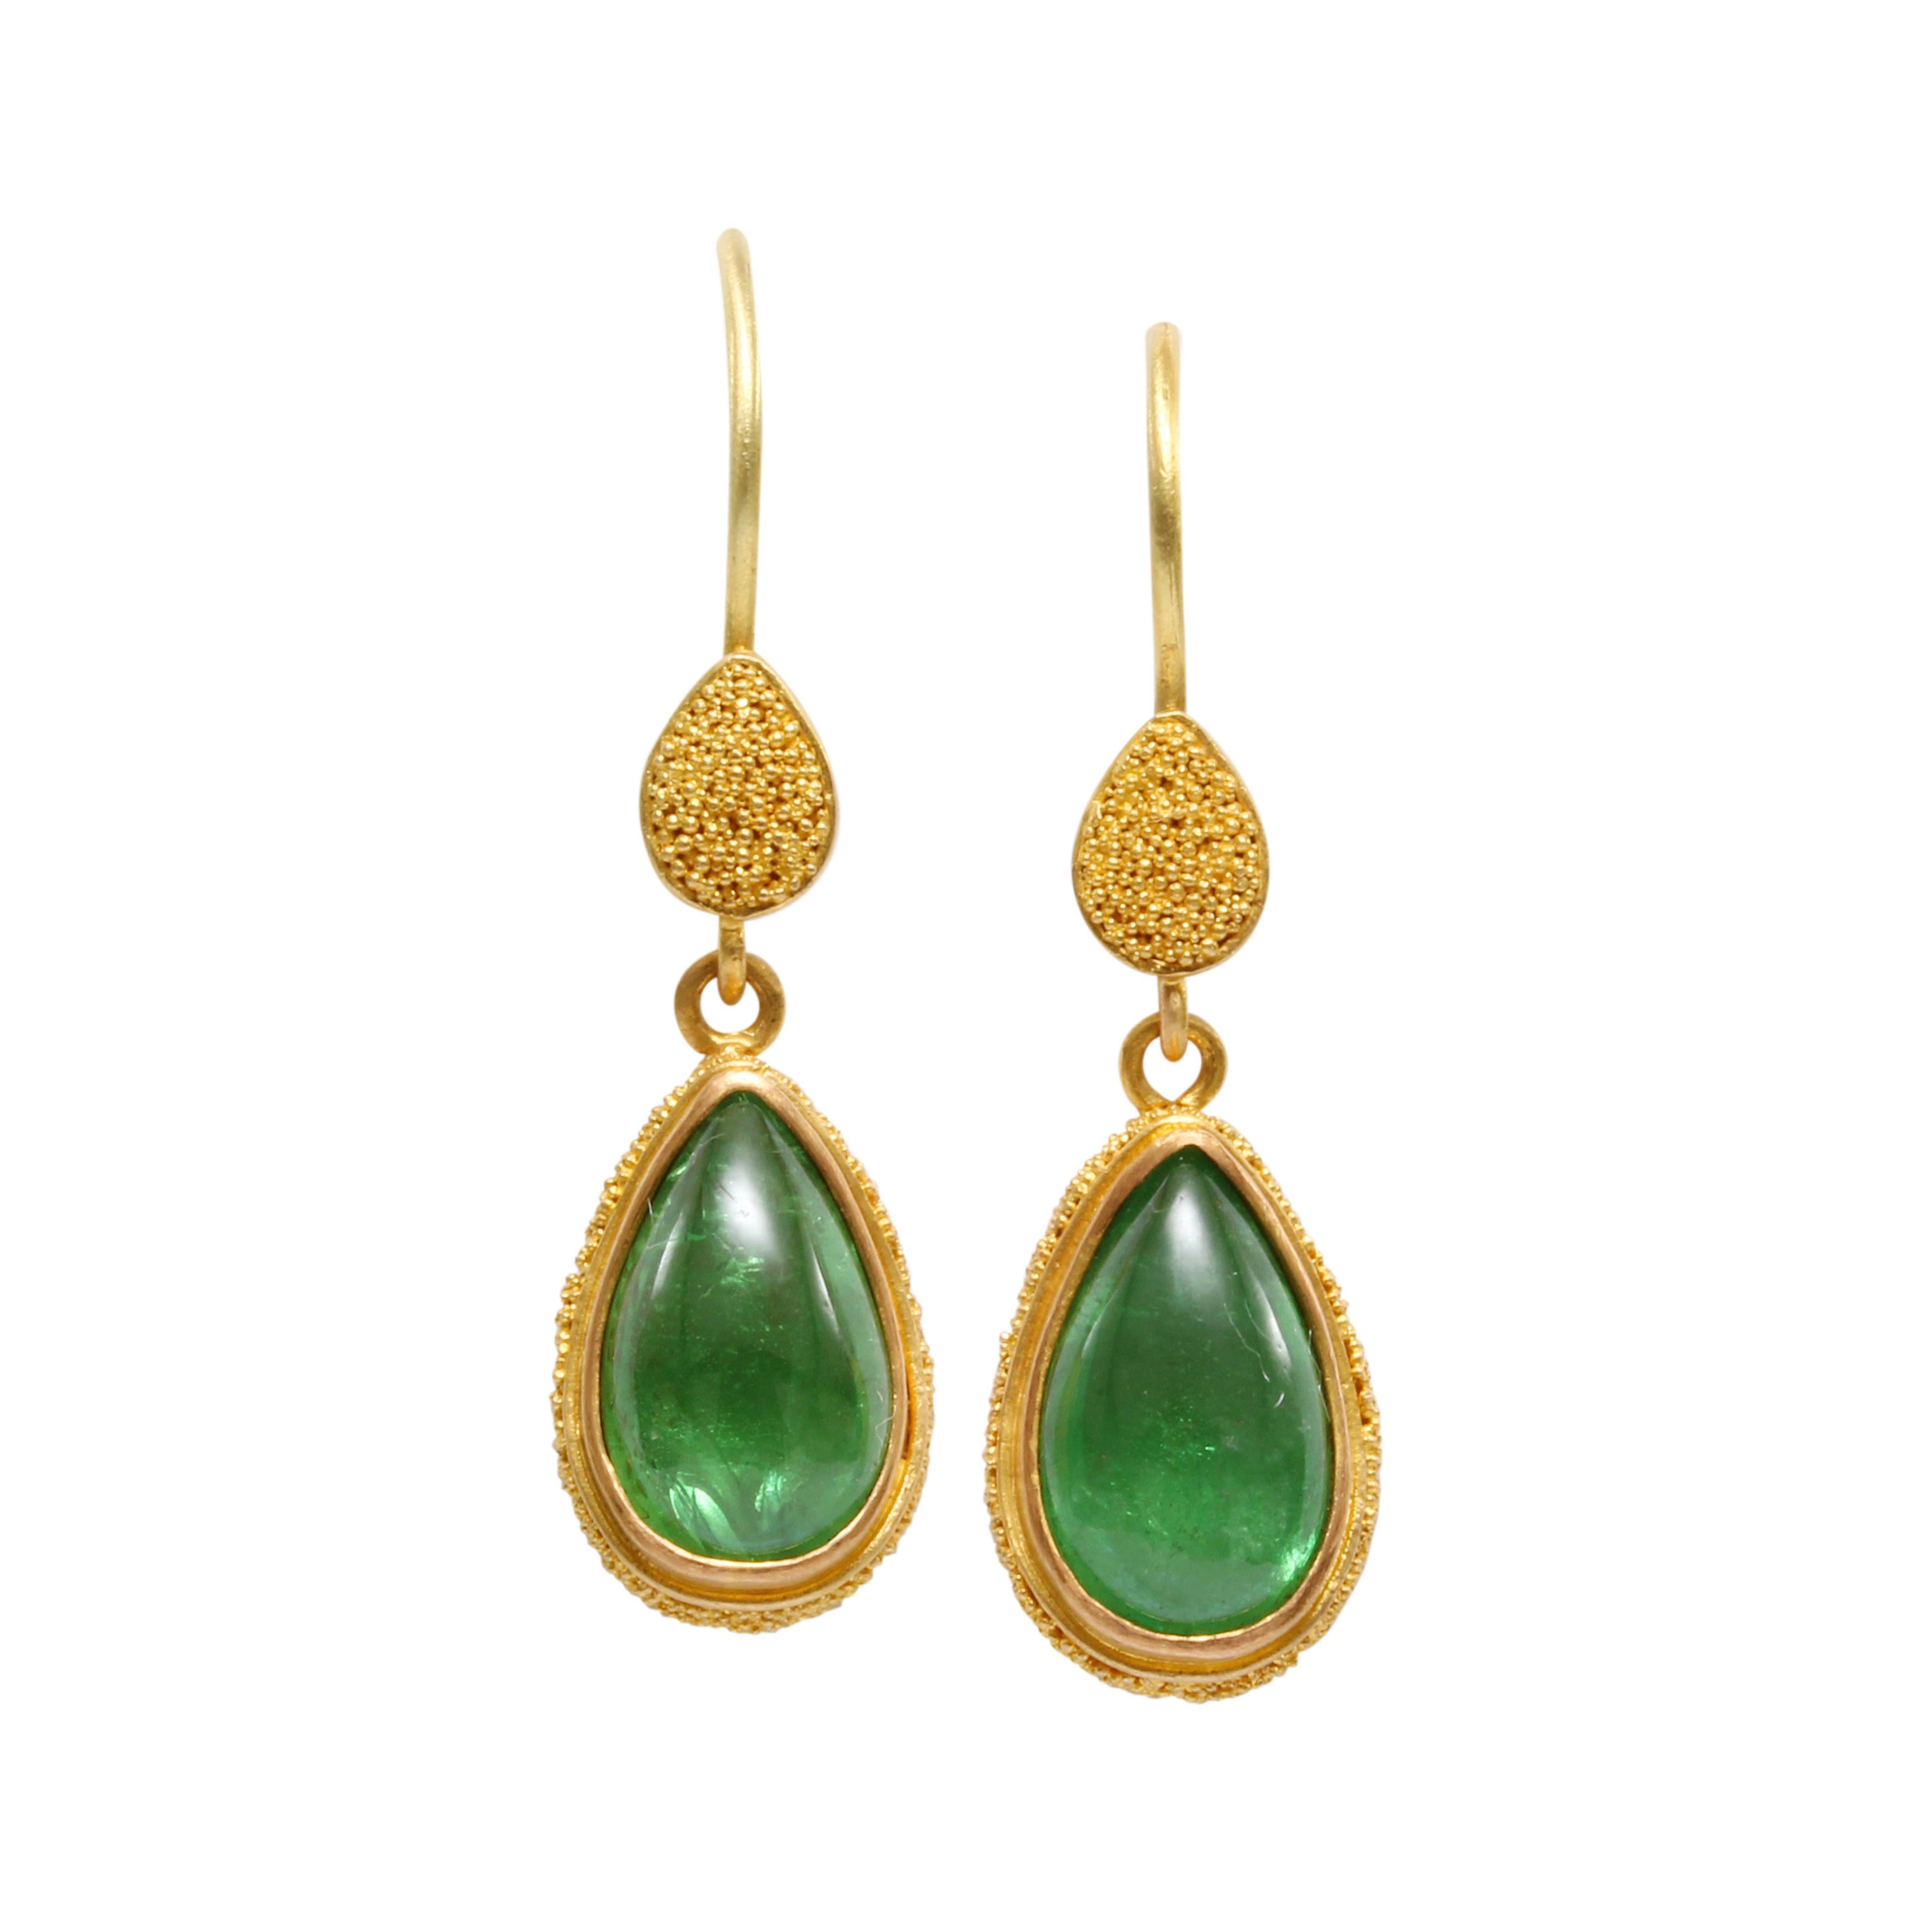 Steven Battelle 5.8 Carats Cabochon Tsavorite 22K Gold Wire Earrings In New Condition For Sale In Soquel, CA